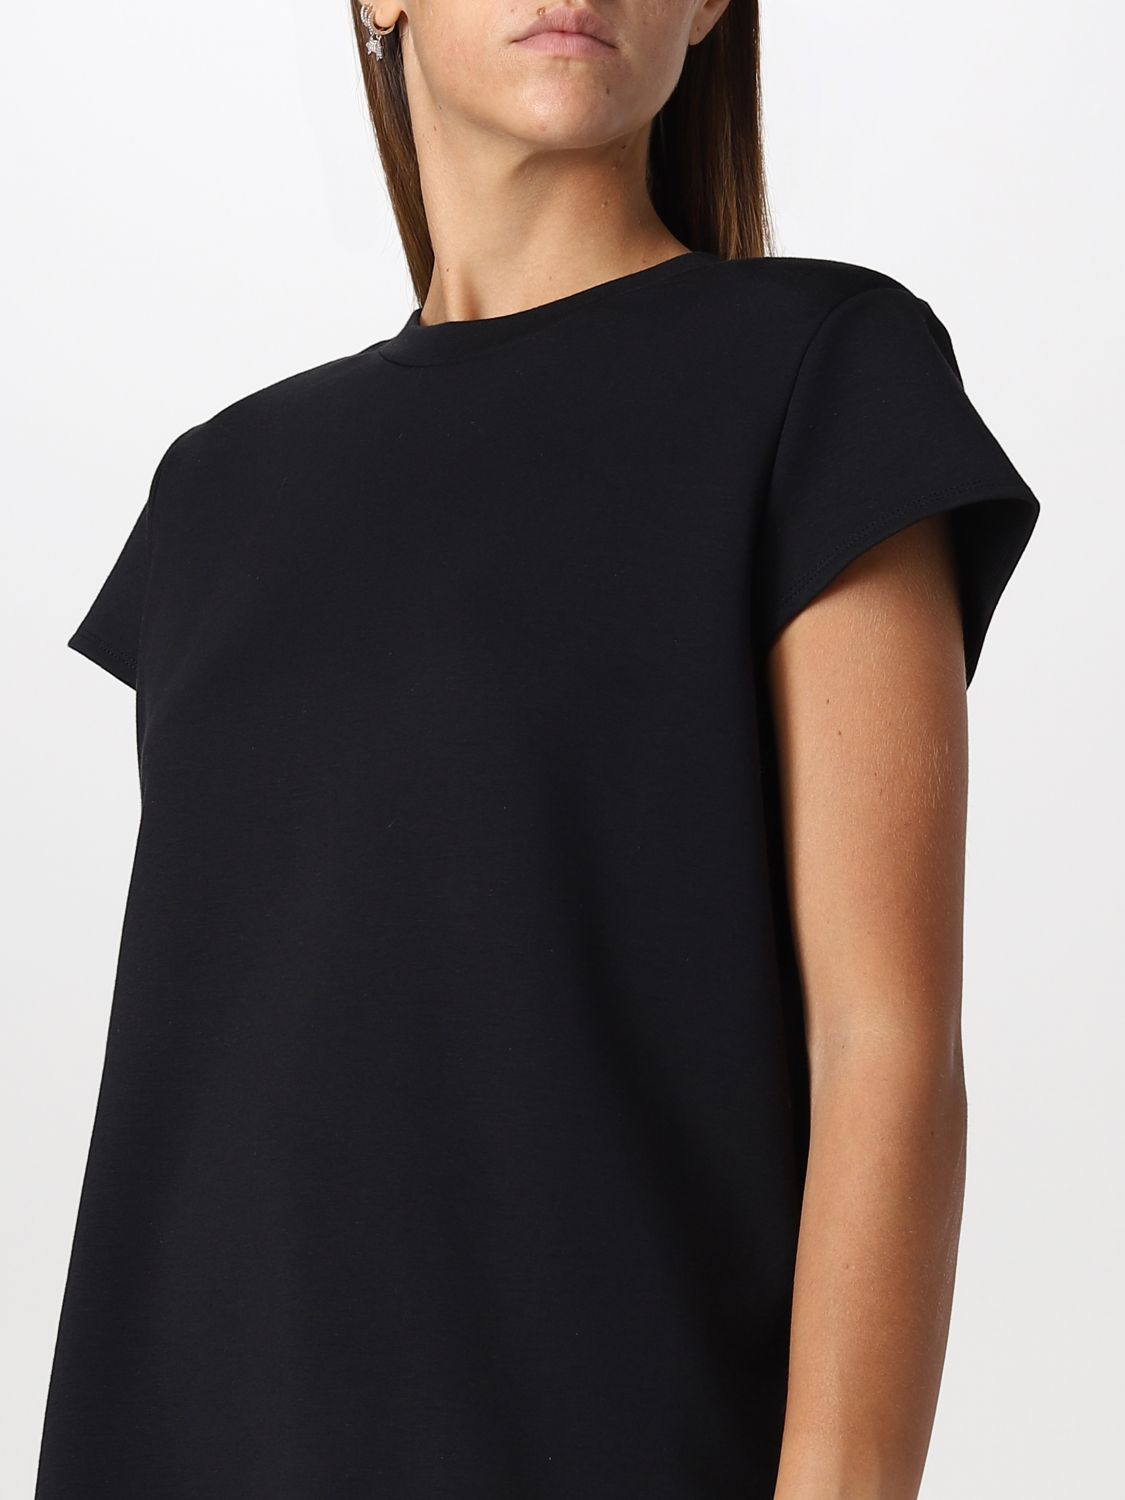 Top Rohe: Rohe top for woman black 3